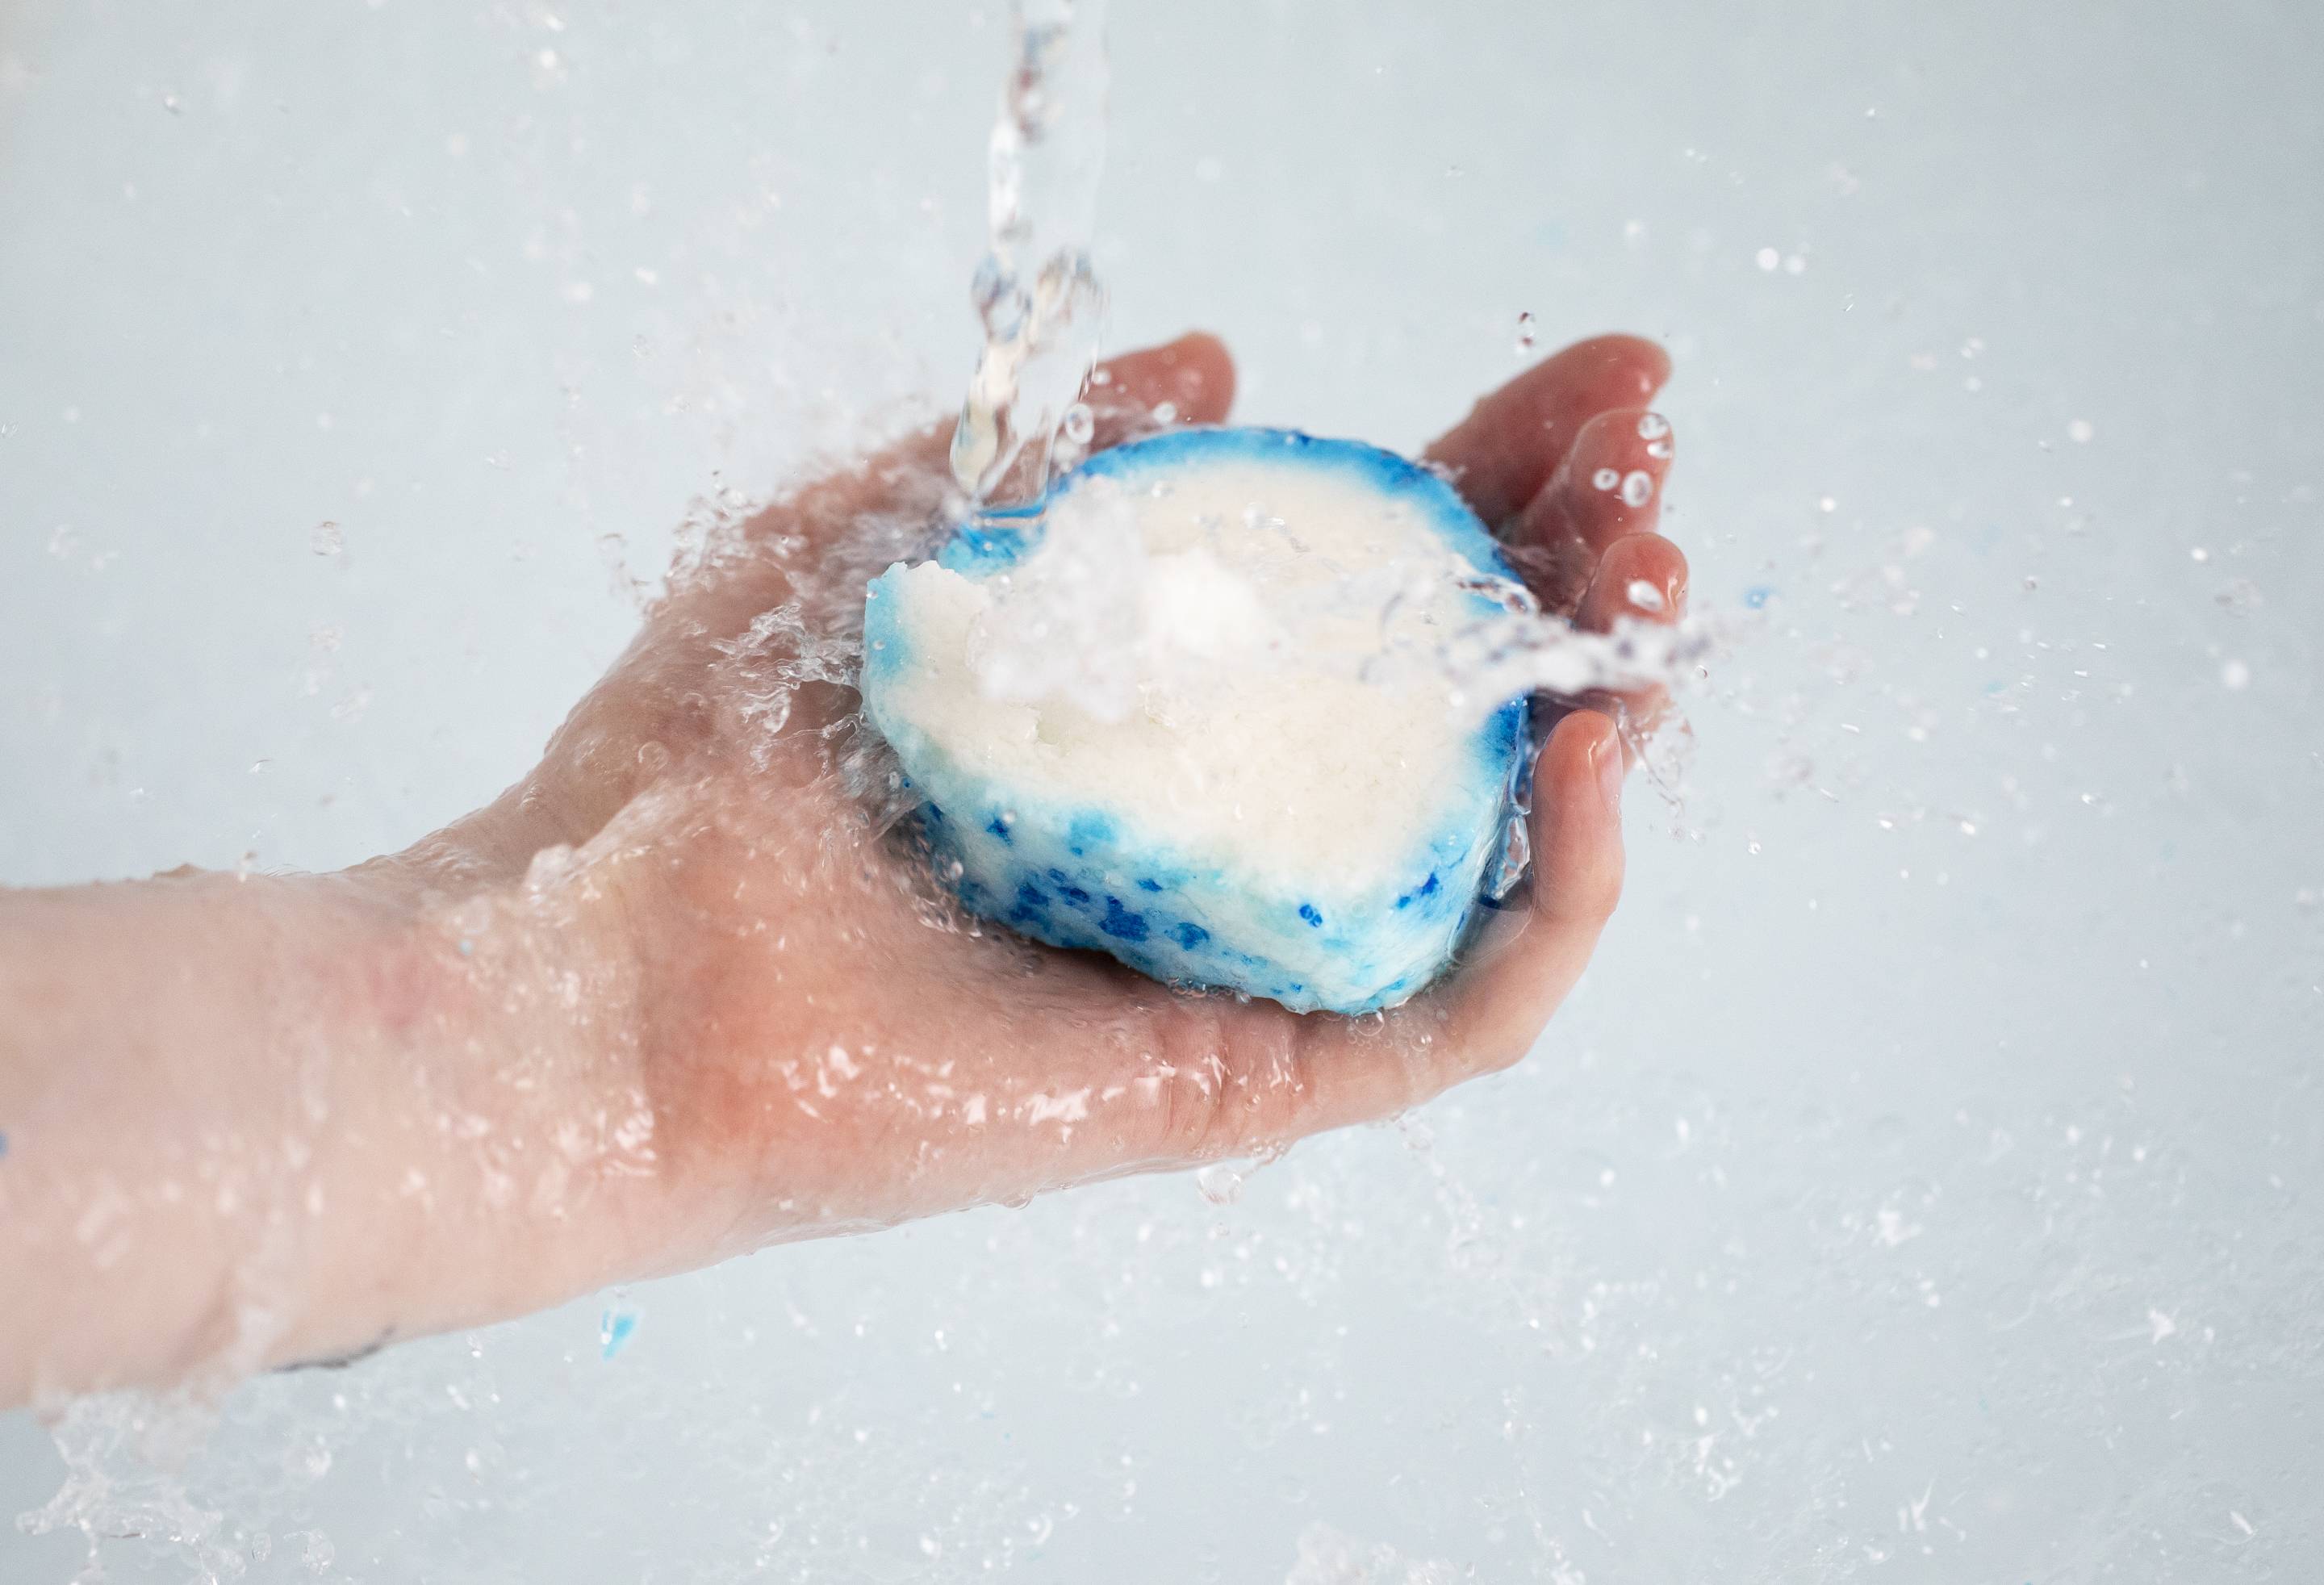 A close-up image of the model's hand holding the Seaside bubble bar under running tap water.